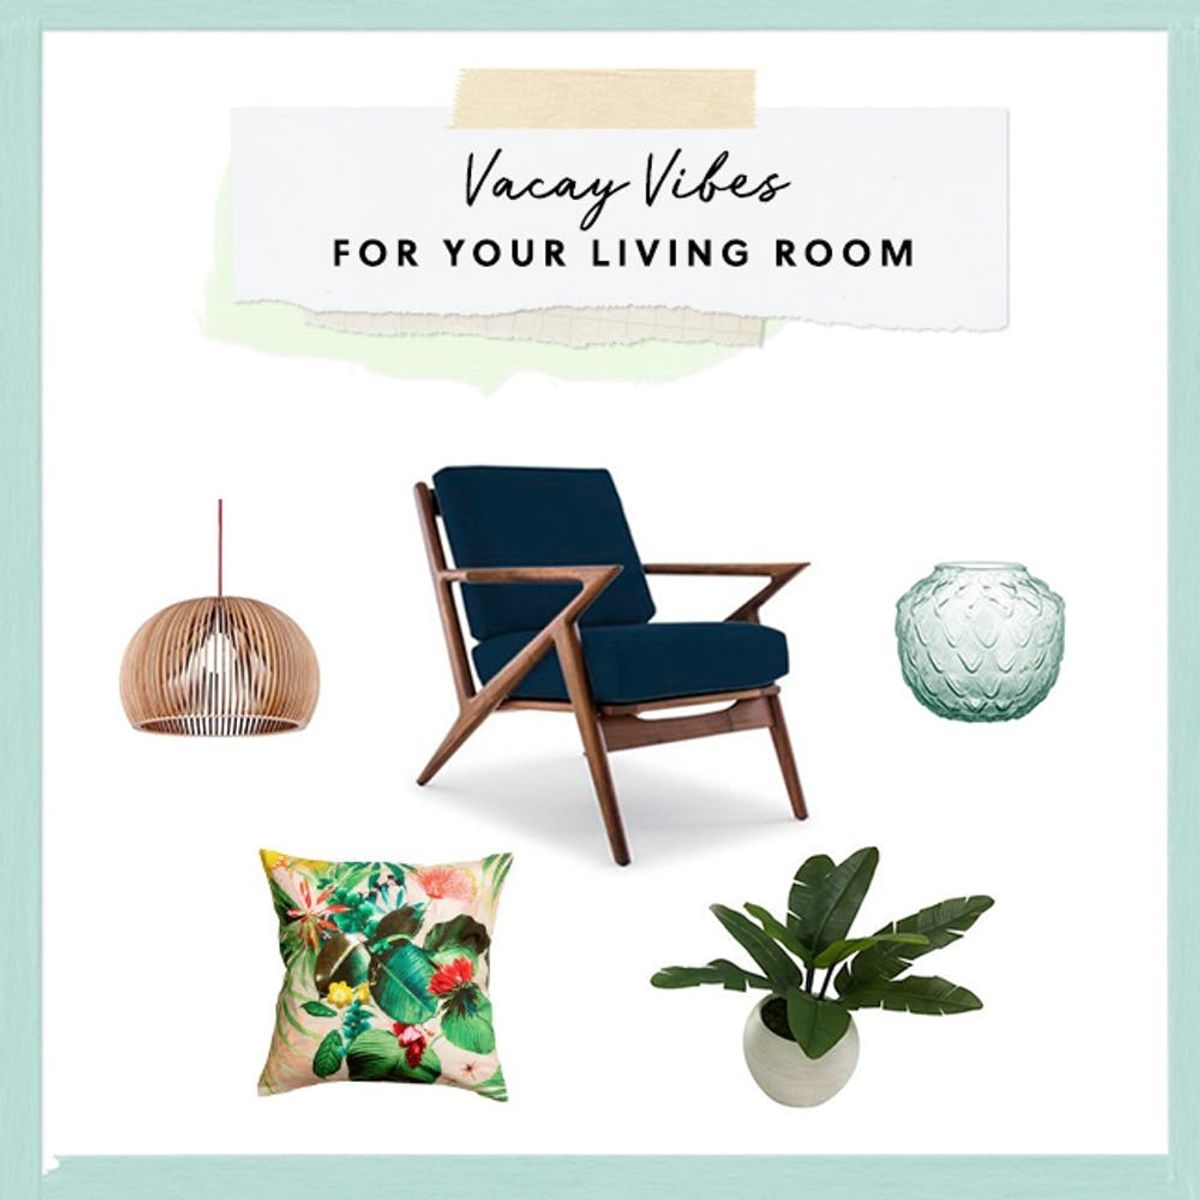 3 Ways to Make Your Living Room Feel Like a Permanent Vacation